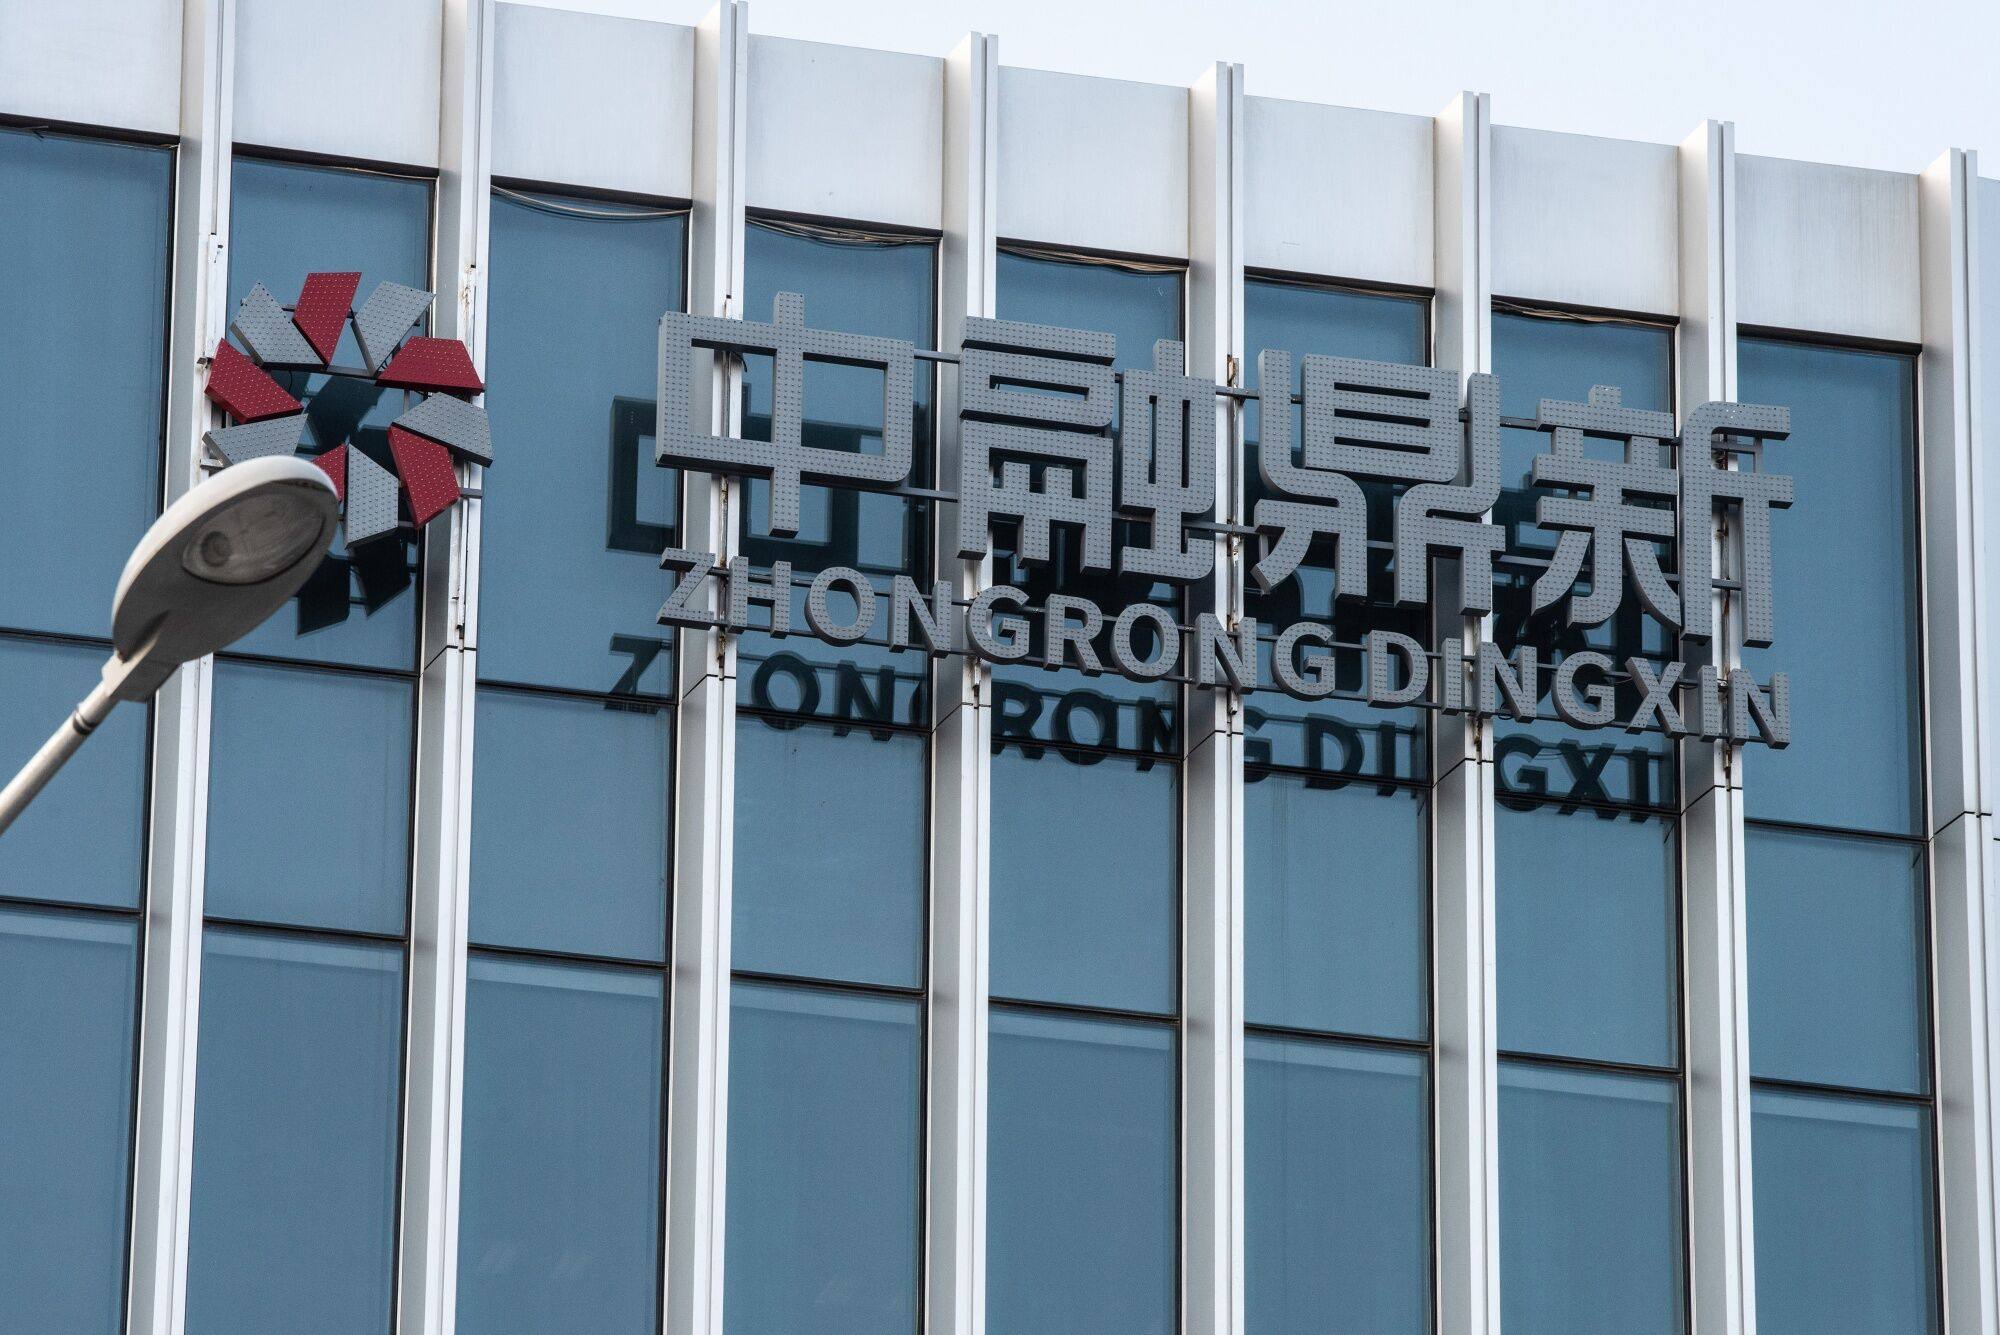 Zhongrong is a subsidiary of Zhongzhi Enterprise Group, one of China’s top private wealth managers. Photo: Bloomberg